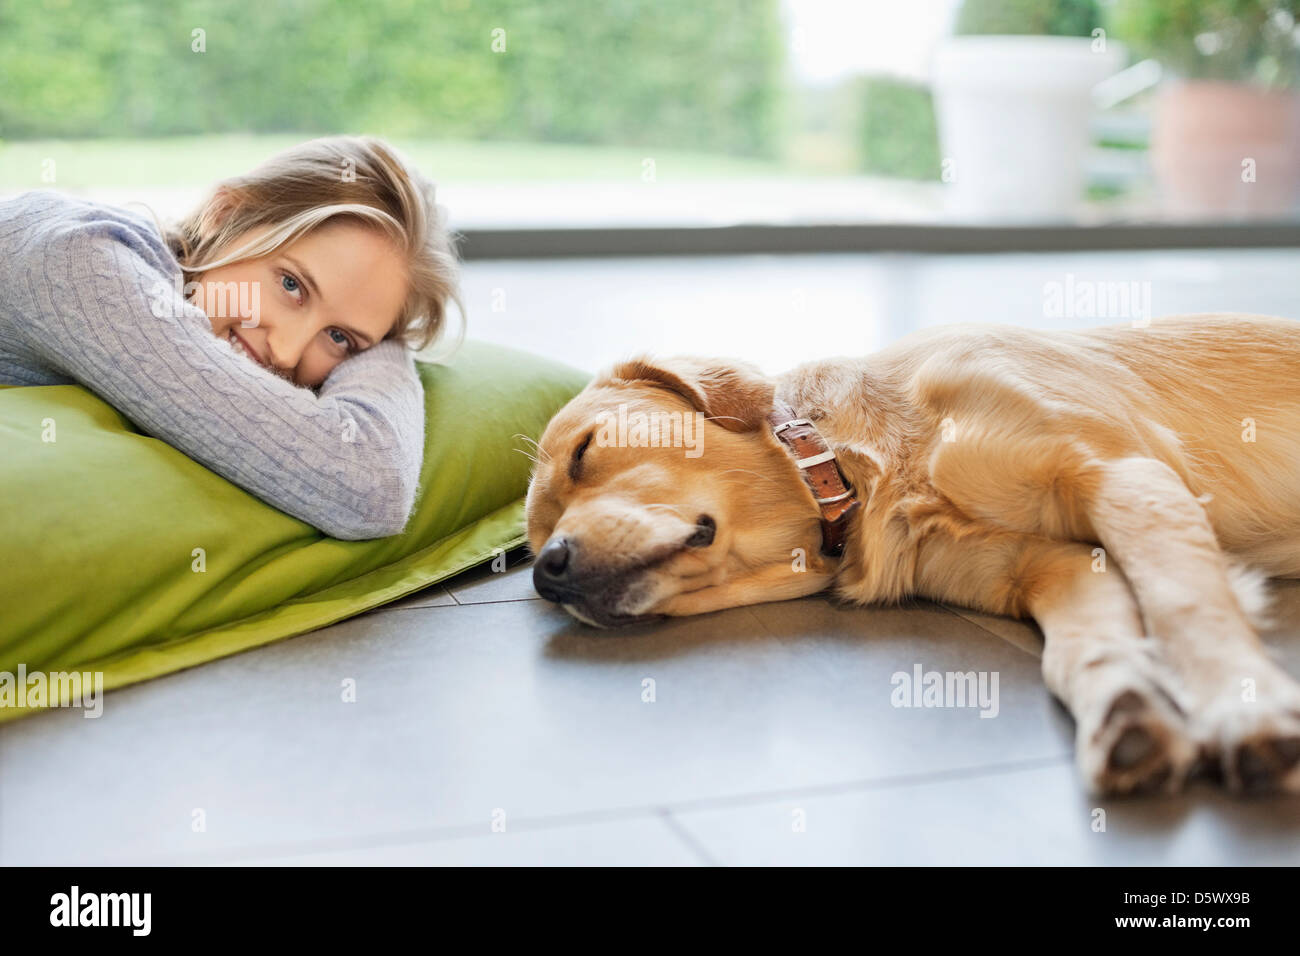 Smiling woman relaxing with dog on floor Banque D'Images